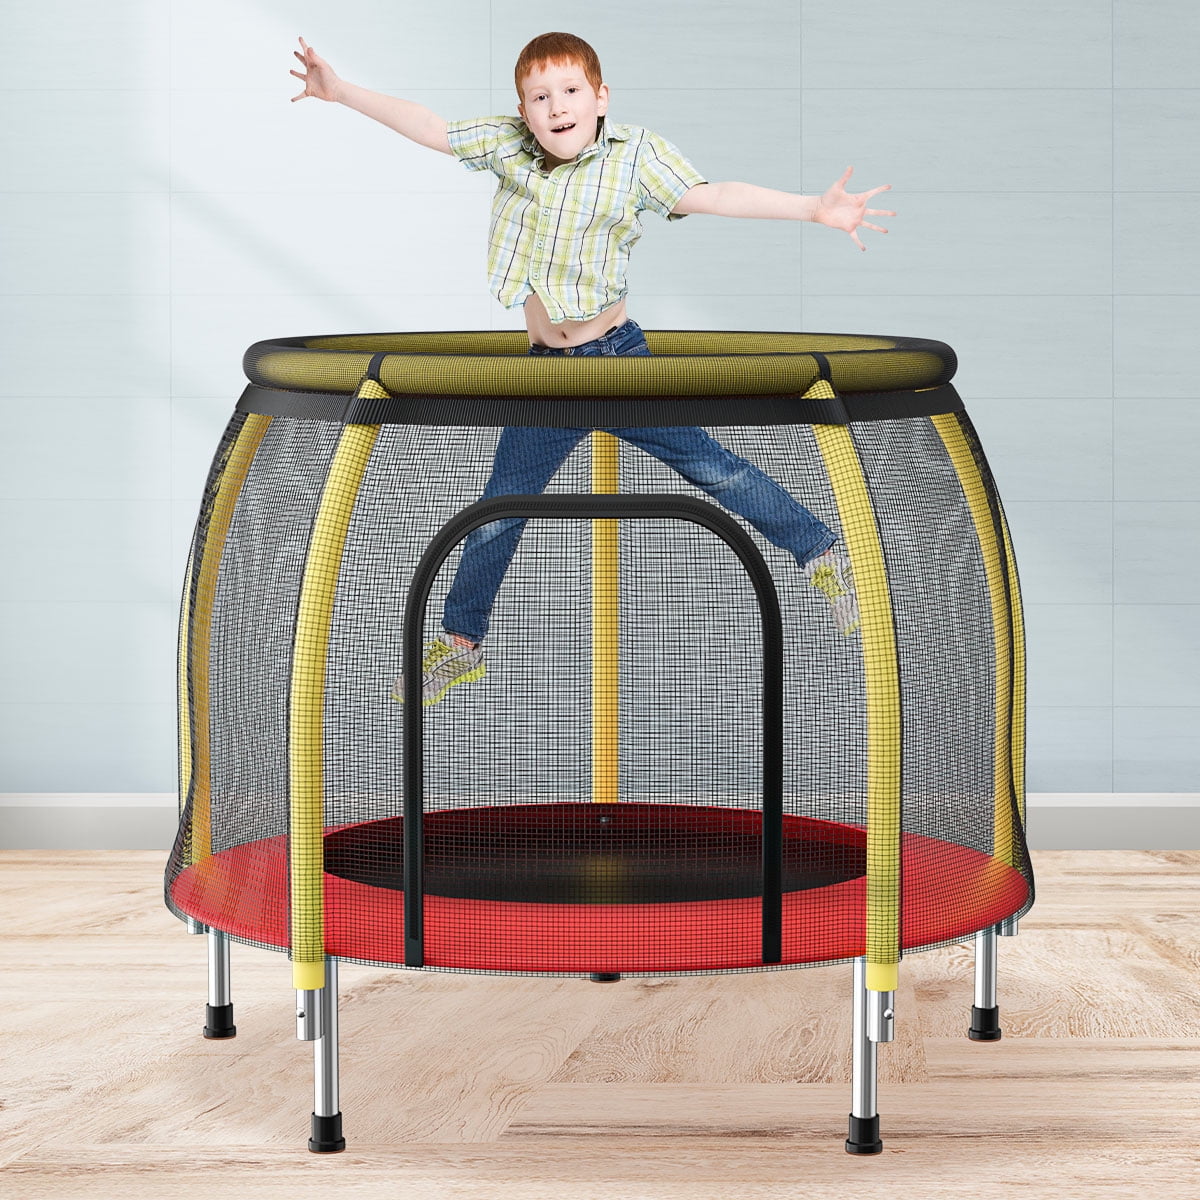 37.8" Kids Mini Trampoline with Safety Enclosure Net, Spring Pad, Zipper, Mini Trampoline for Kids Indoor/Outdoor, Max Load Bearing 441lb​